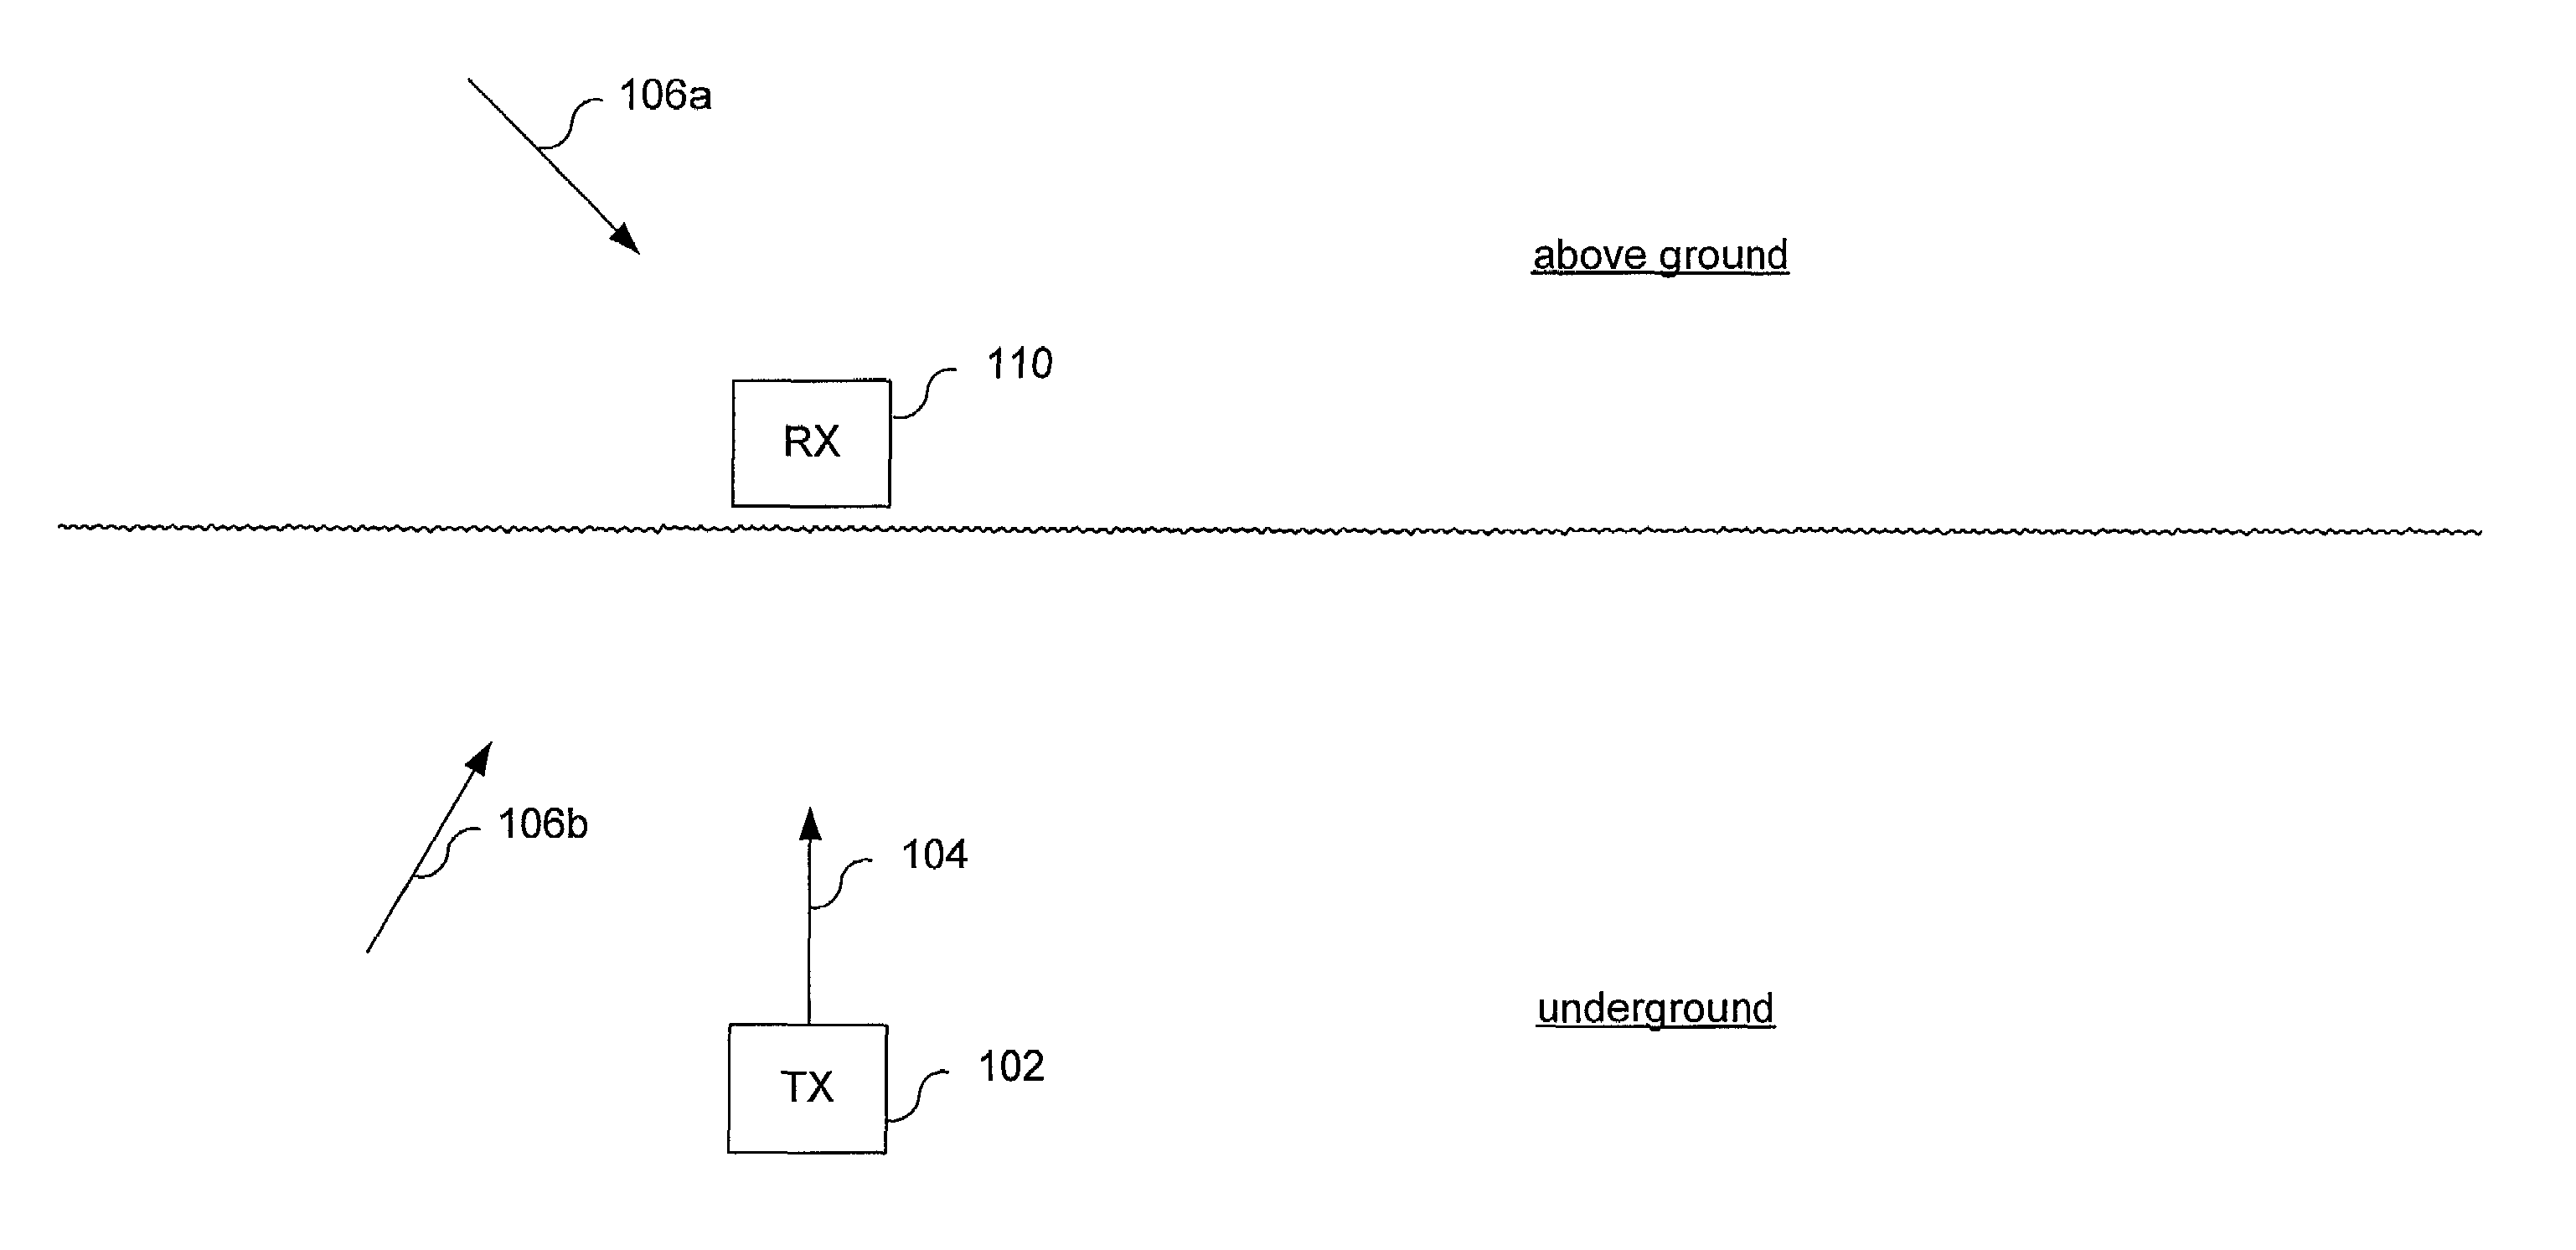 Method and system for producing a magnetic field signal usable for locating an underground object